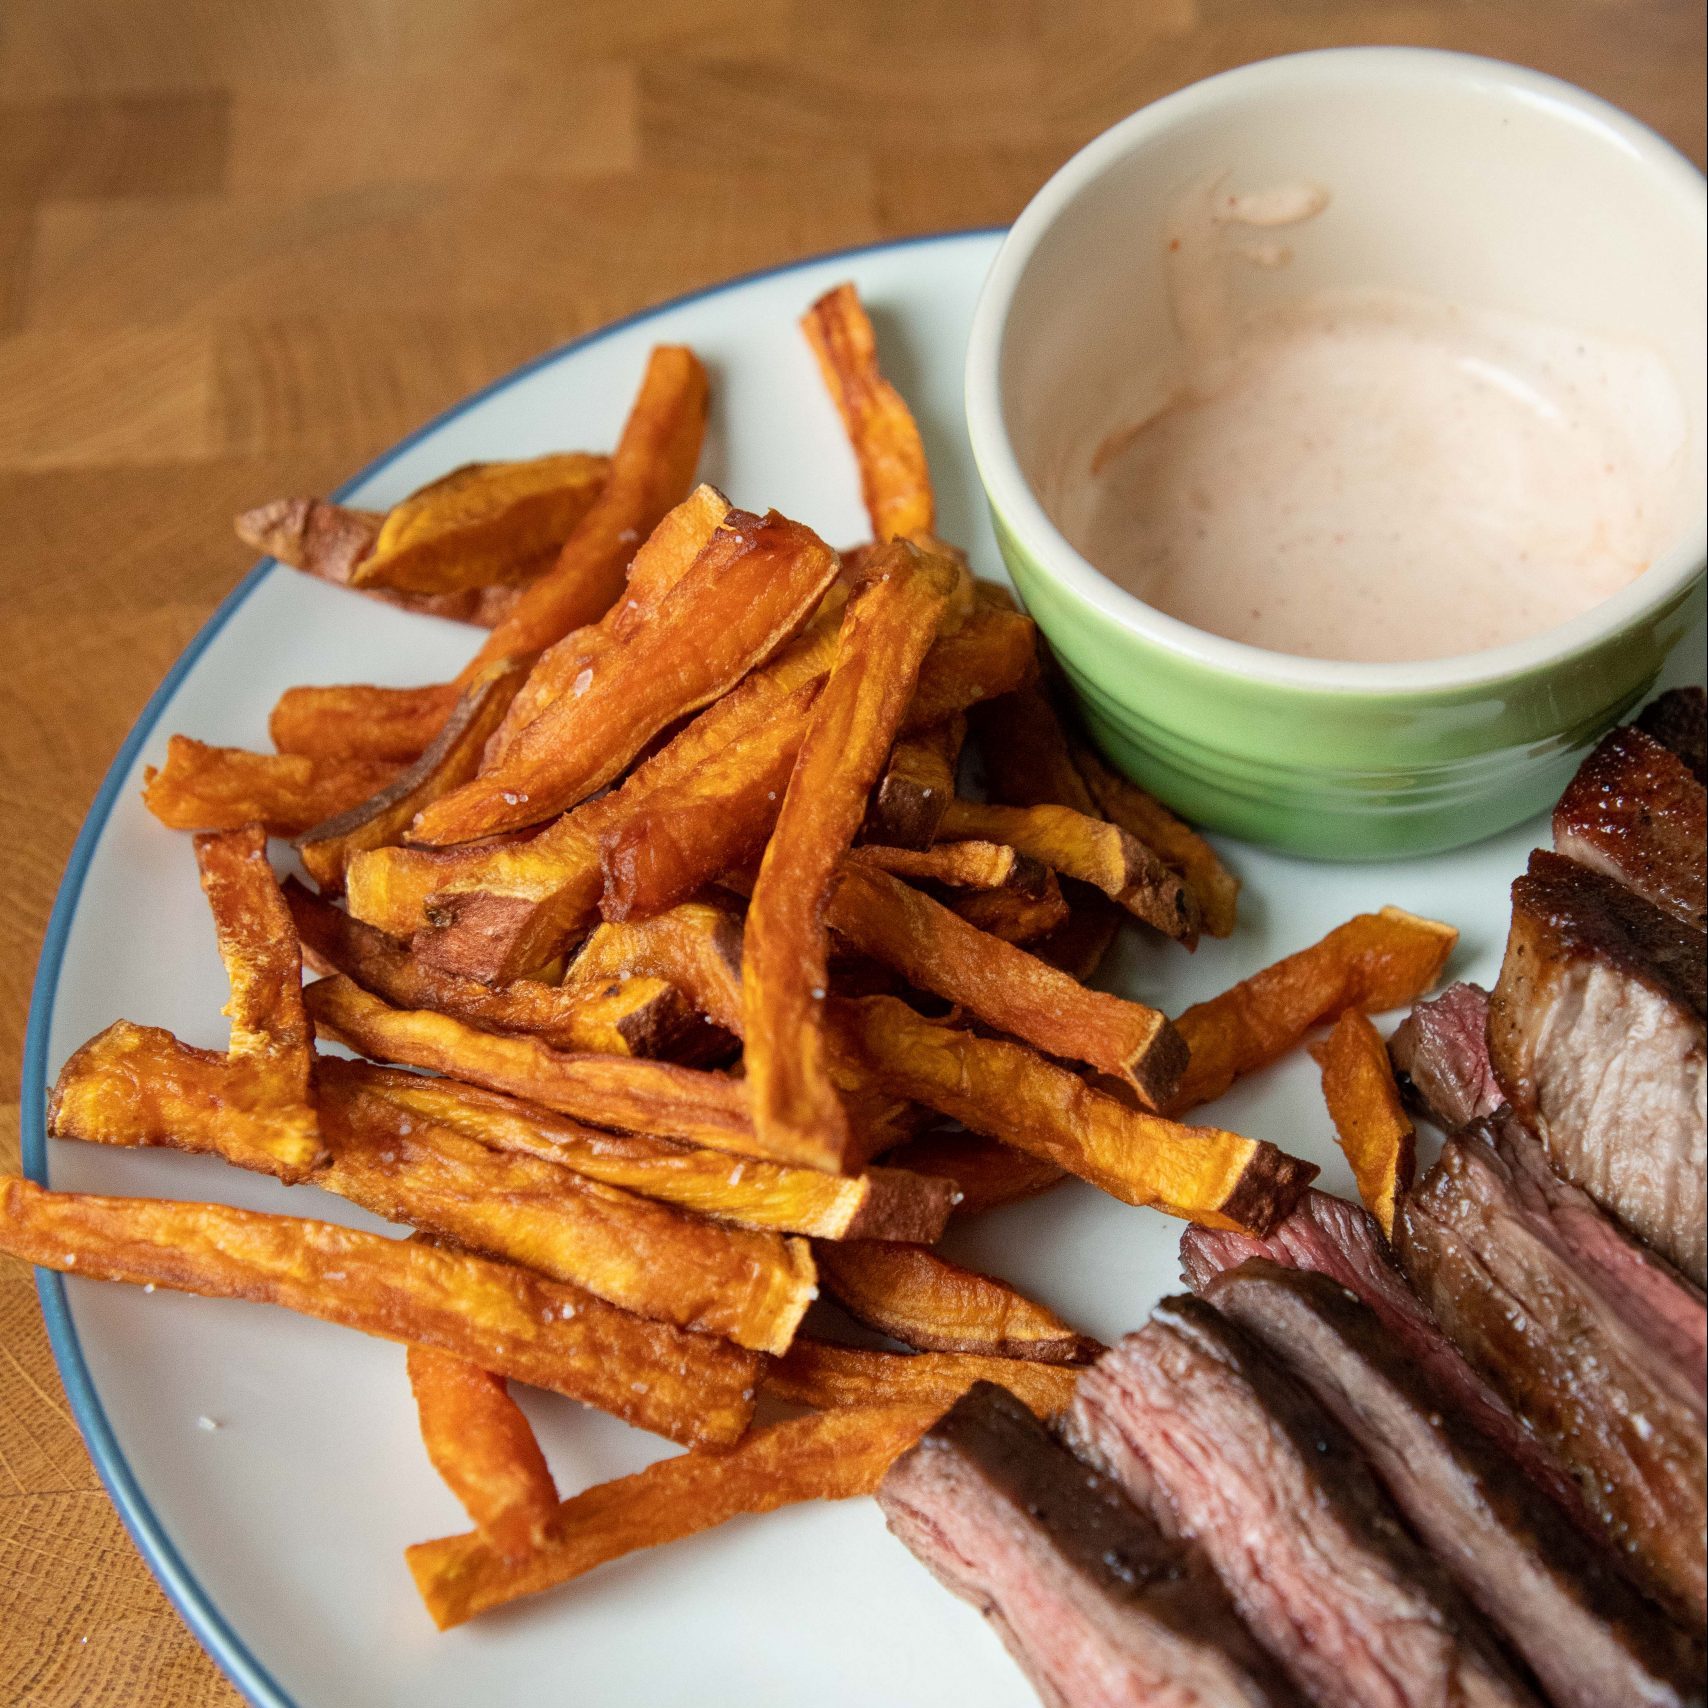 Homemade sweet potato fries are easier than you think!